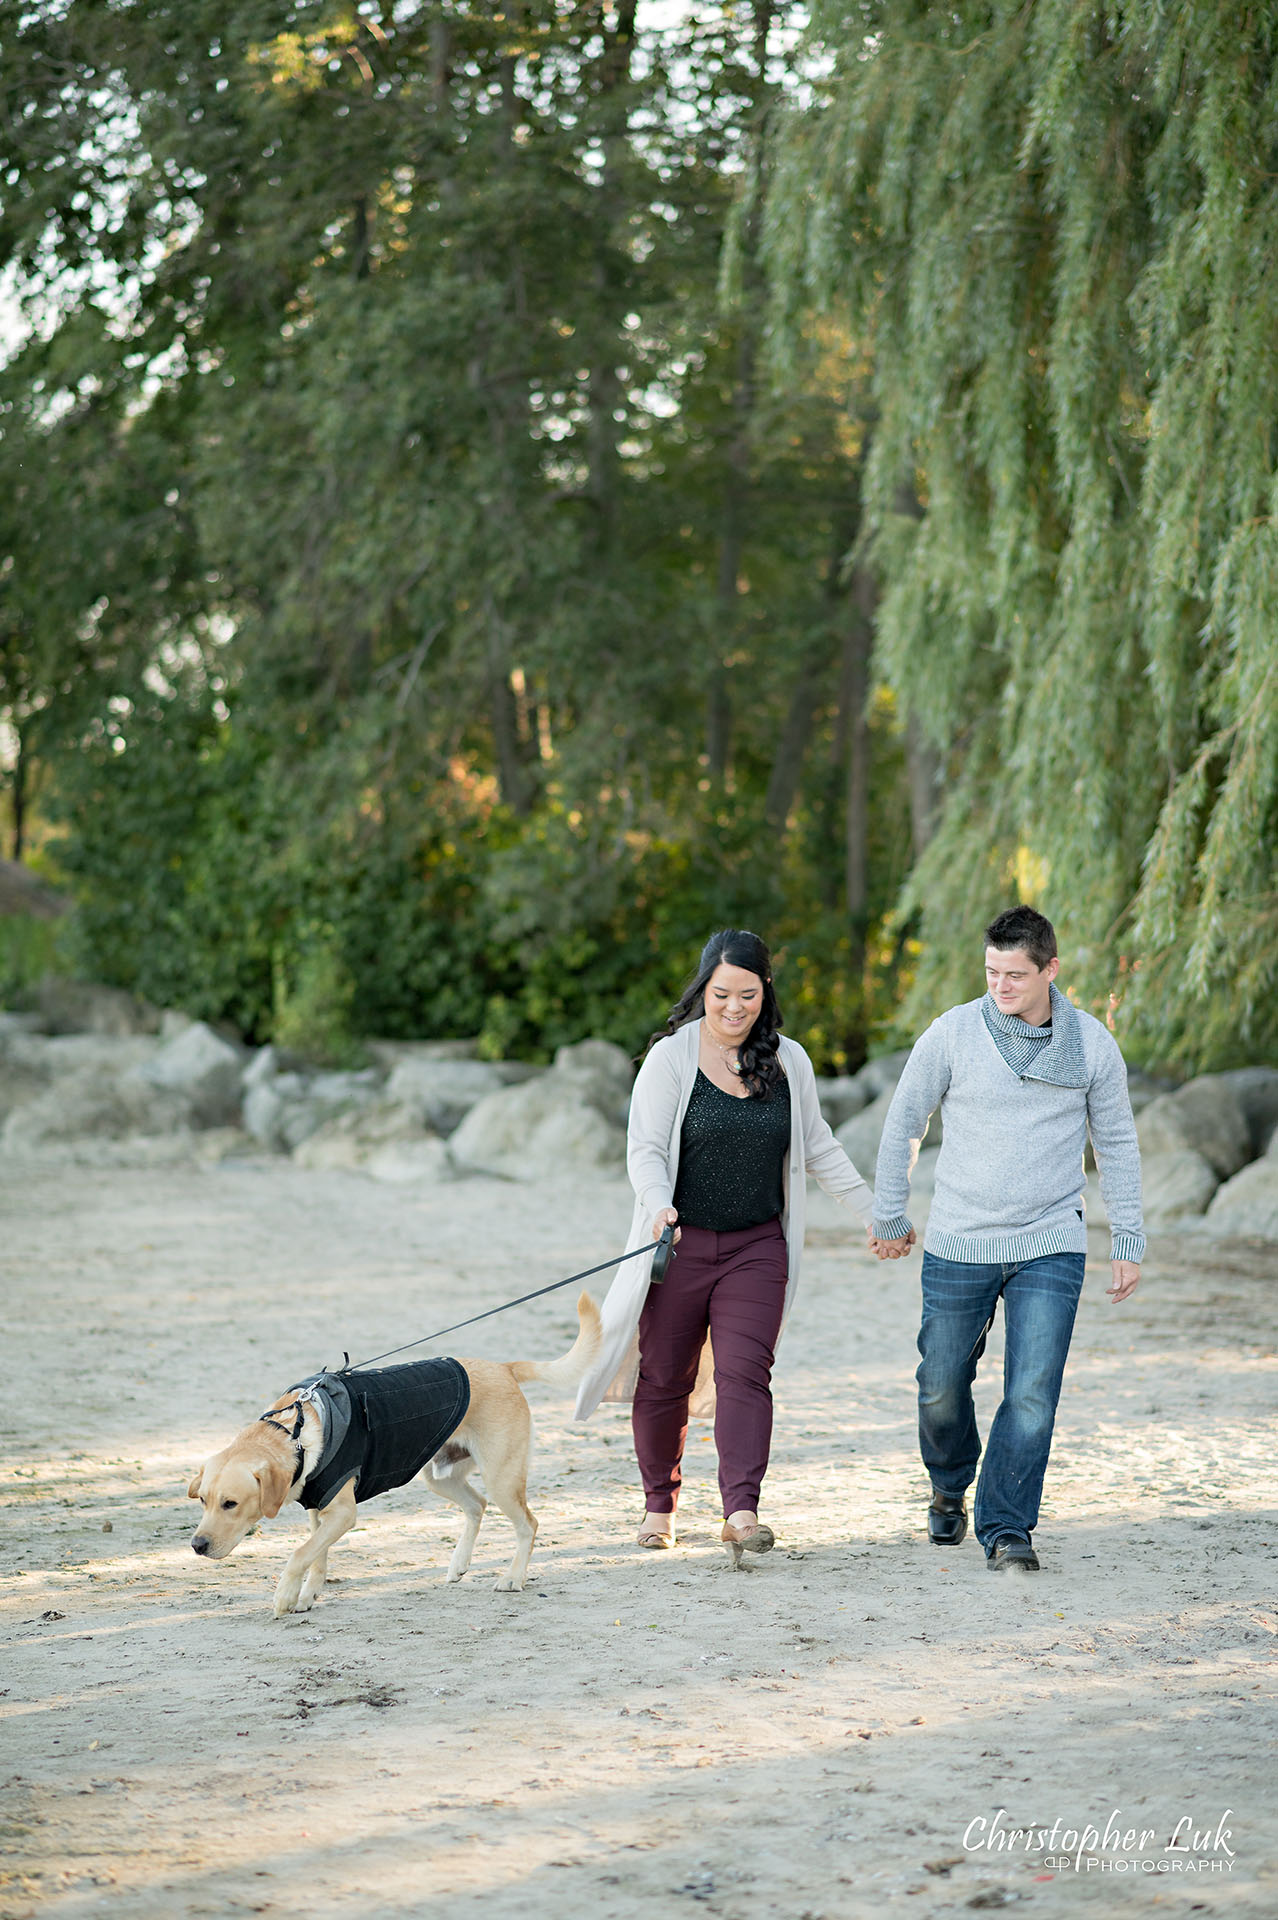 Christopher Luk Toronto Wedding Photographer Mississauga Jack Darling Memorial Park Rattray Marsh Conservation Area Beach Waterfront Autumn Engagement Session Natural Candid Photojournalistic Golden Labrador Retriever Dog Parents Fur Baby Portrait  Walking Together